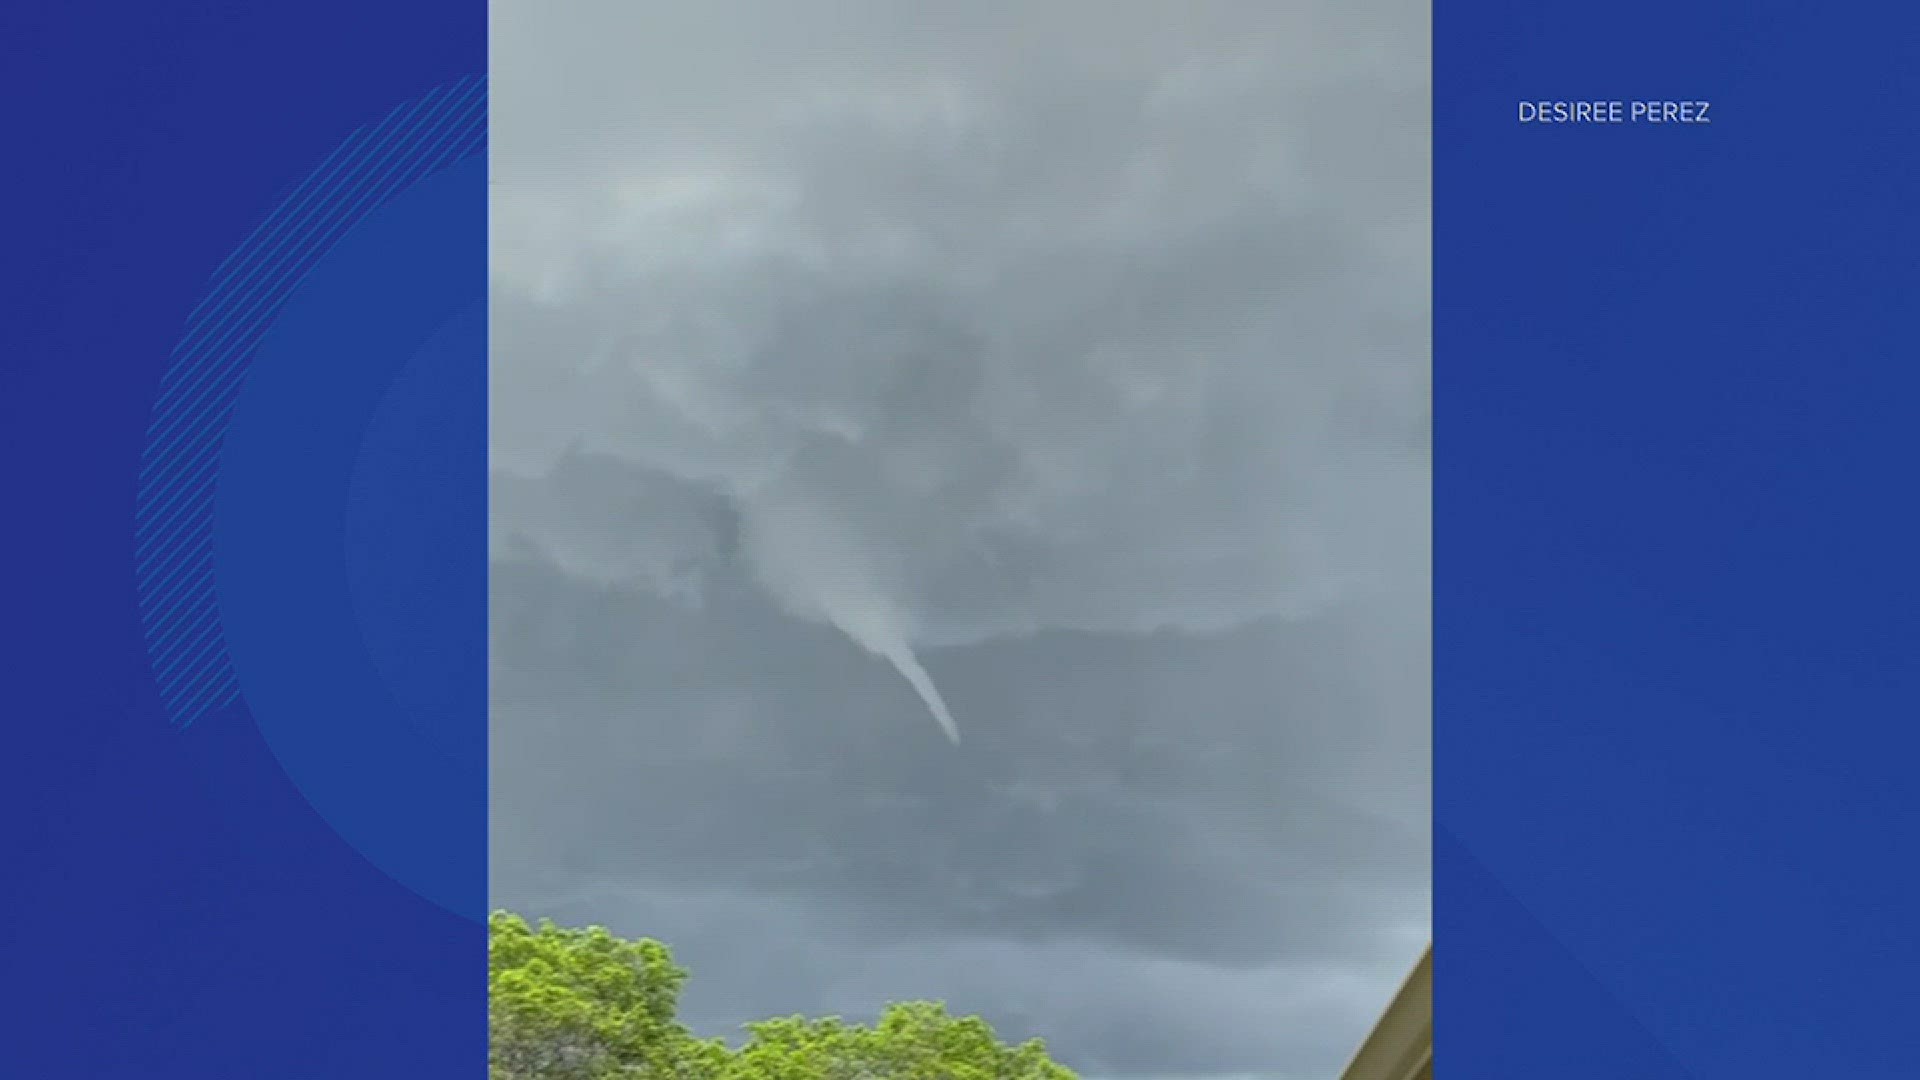 9NEWS viewer Desiree Perez took this video of a funnel cloud she spotted in Aurora.